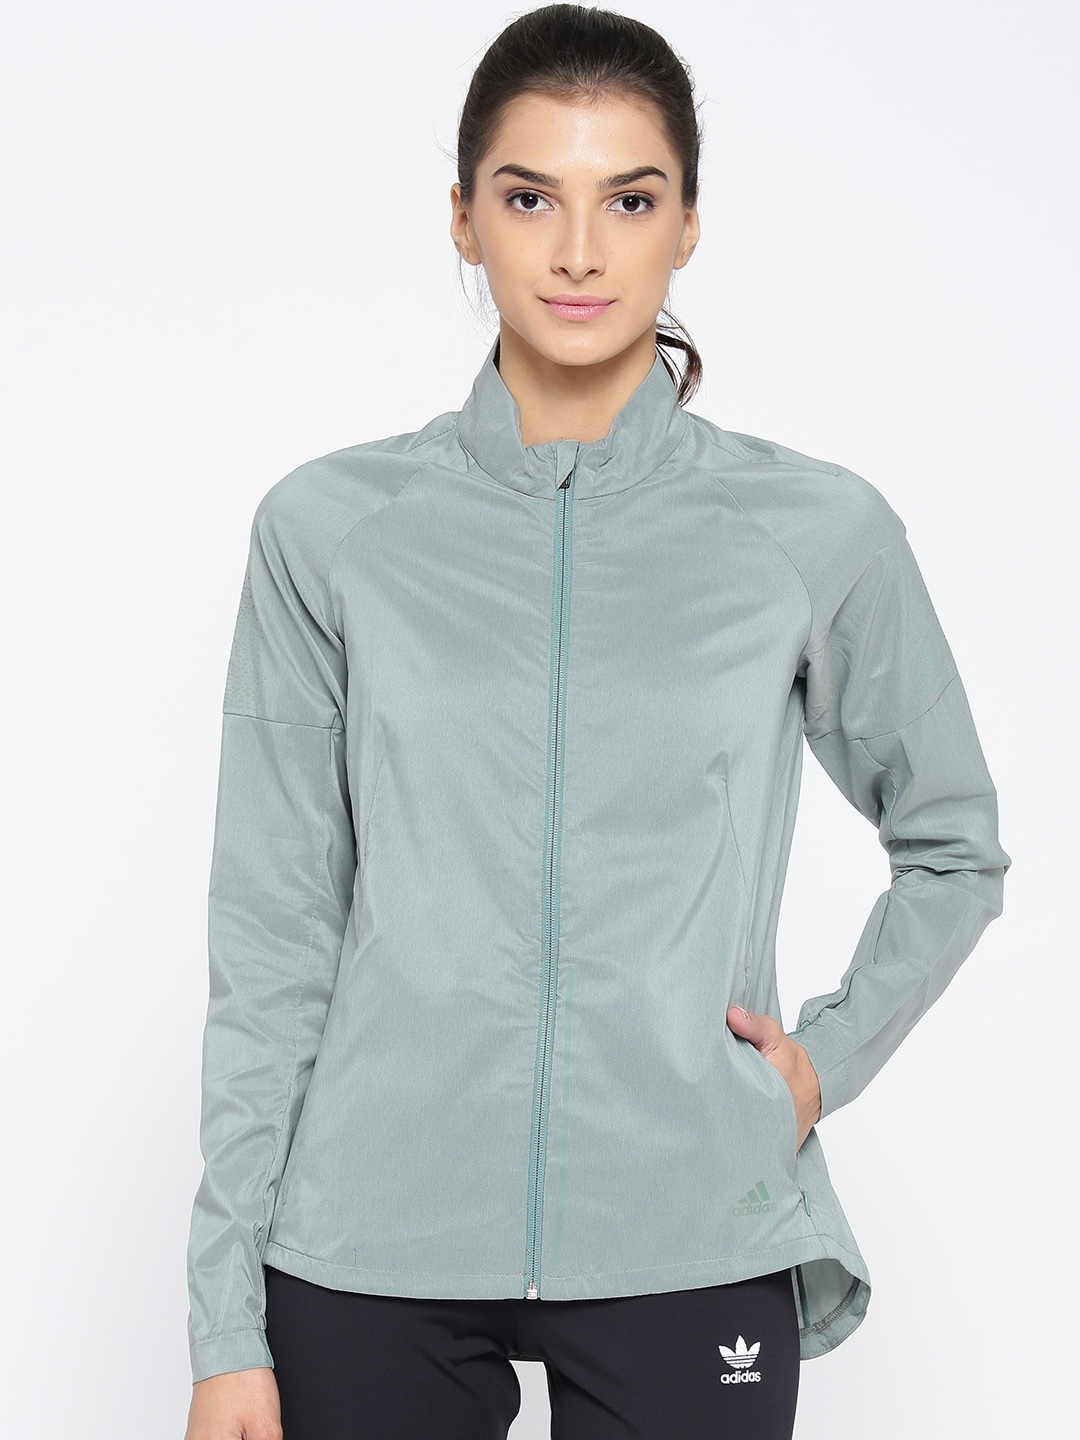 green adidas outfit women's